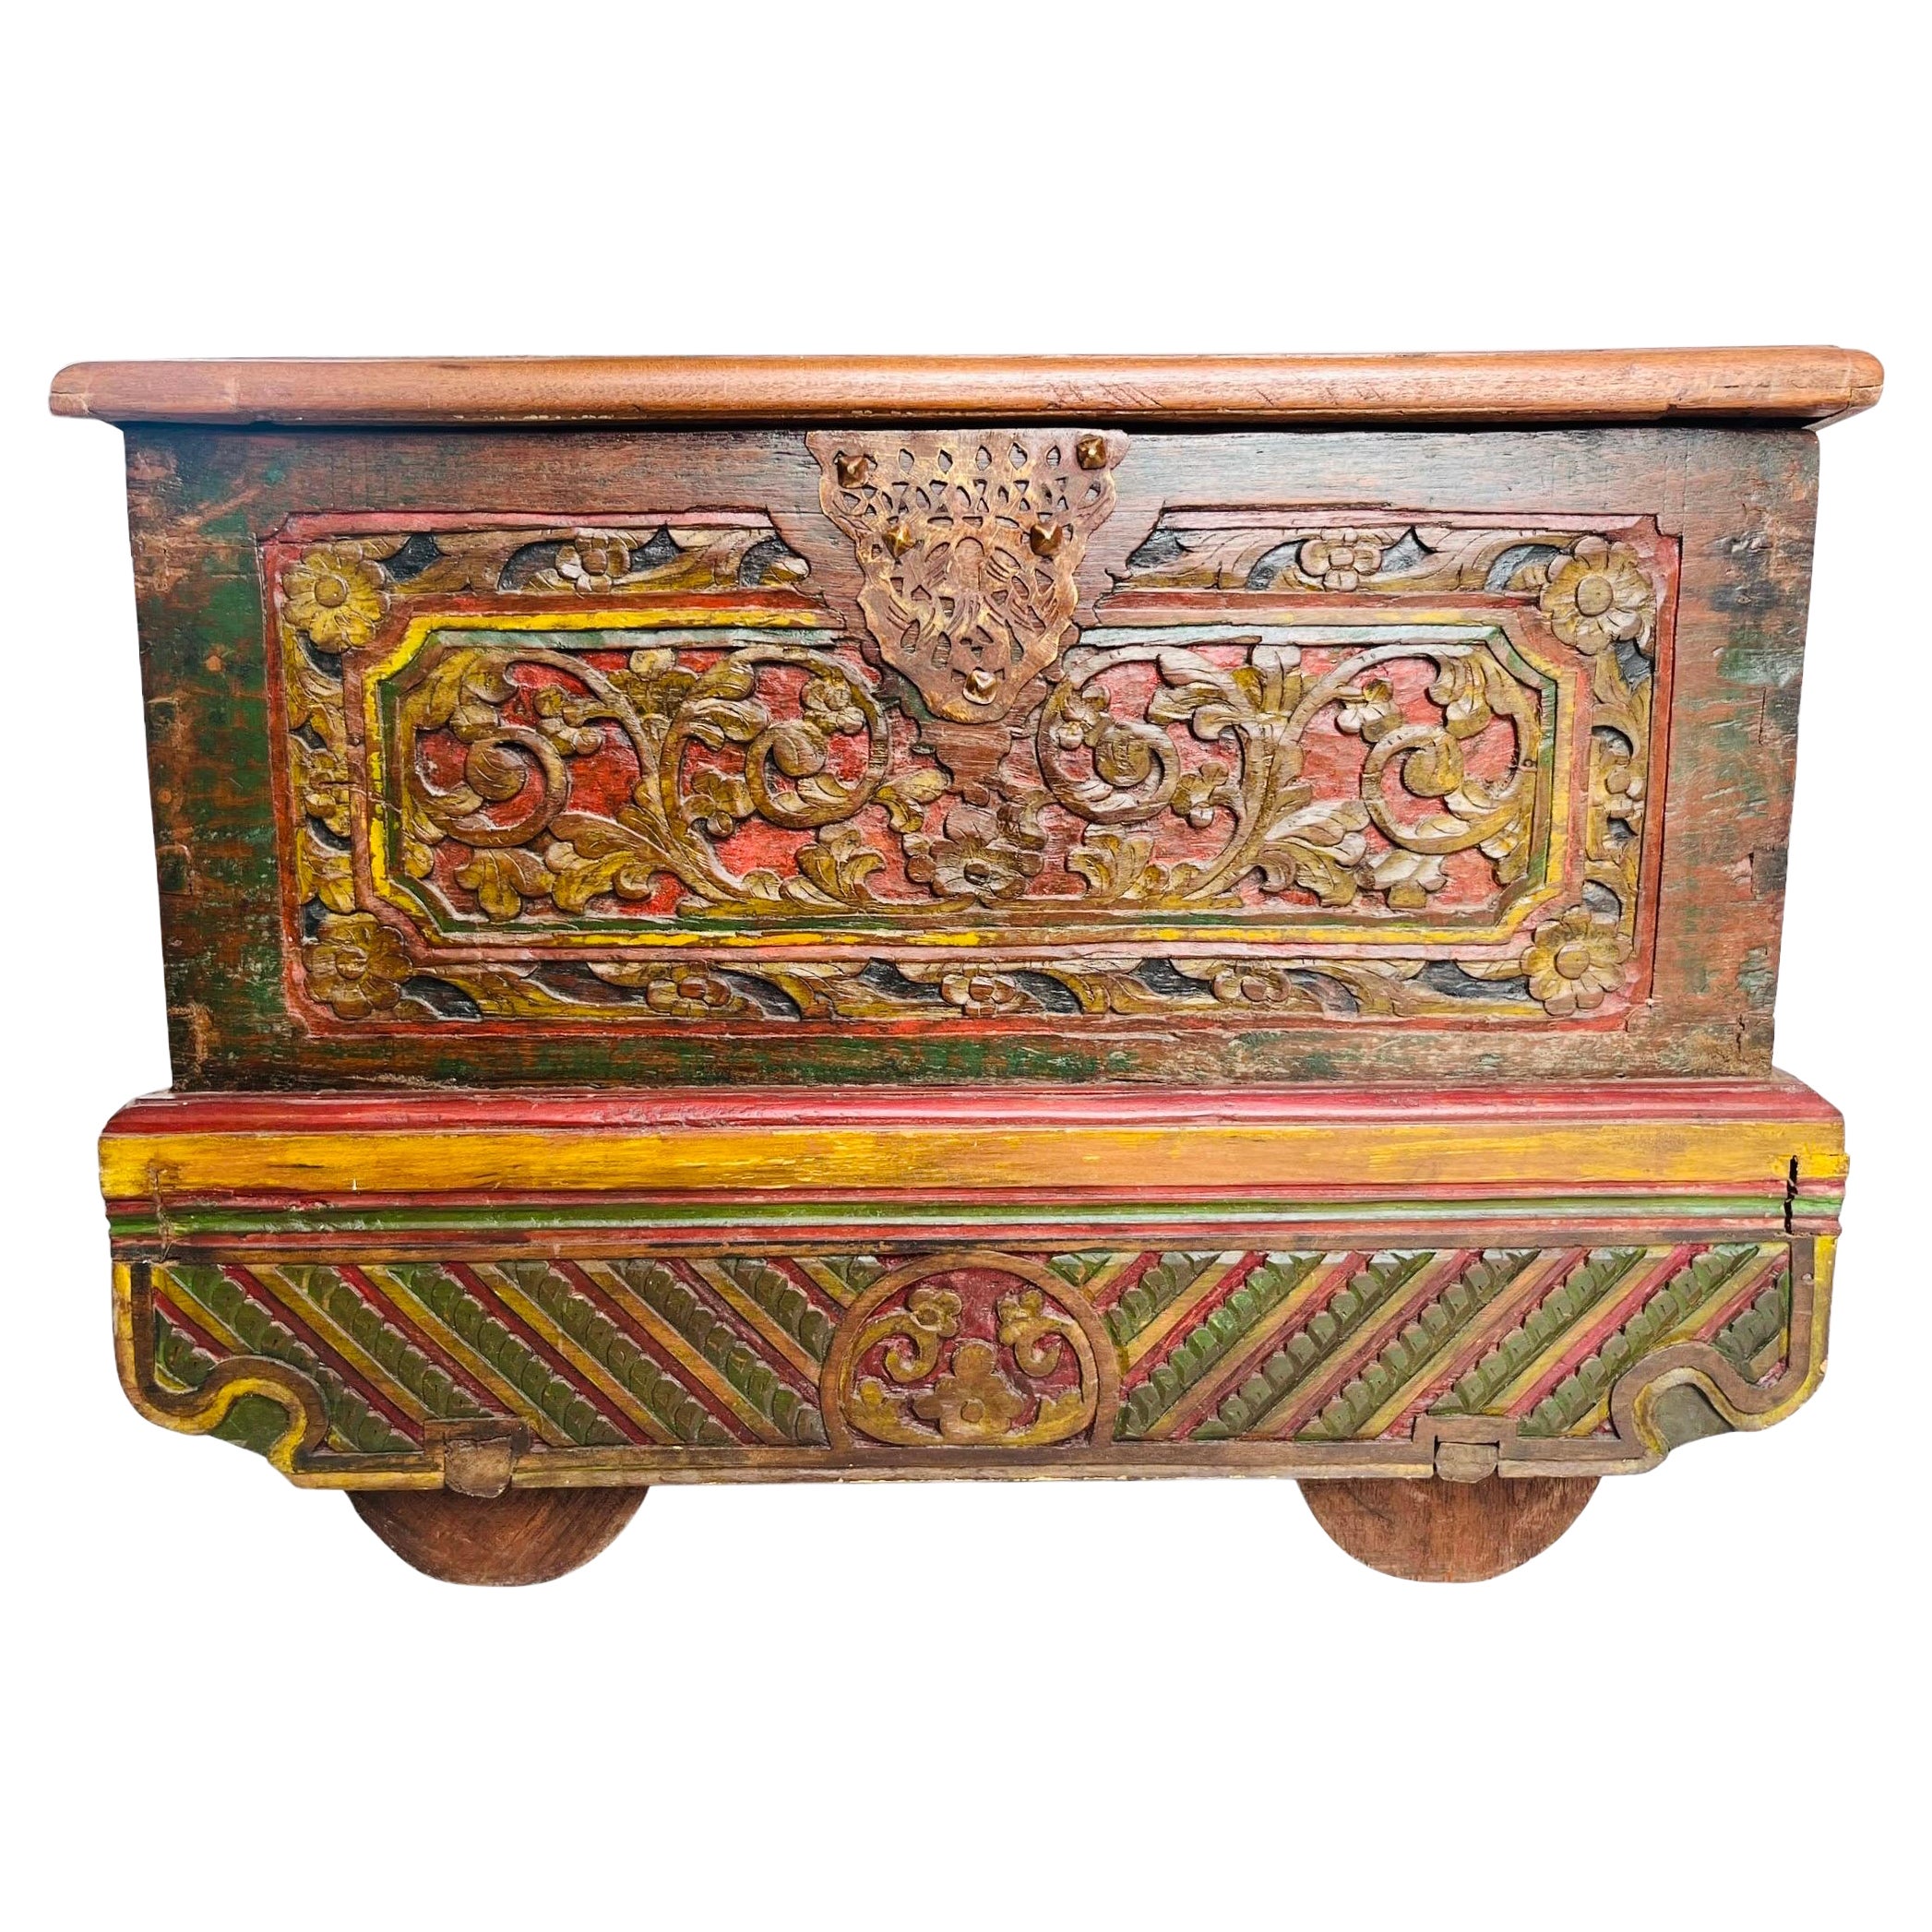 Merchant's Chest on wheels in carved and painted wood - Madura Indonesia 19th For Sale